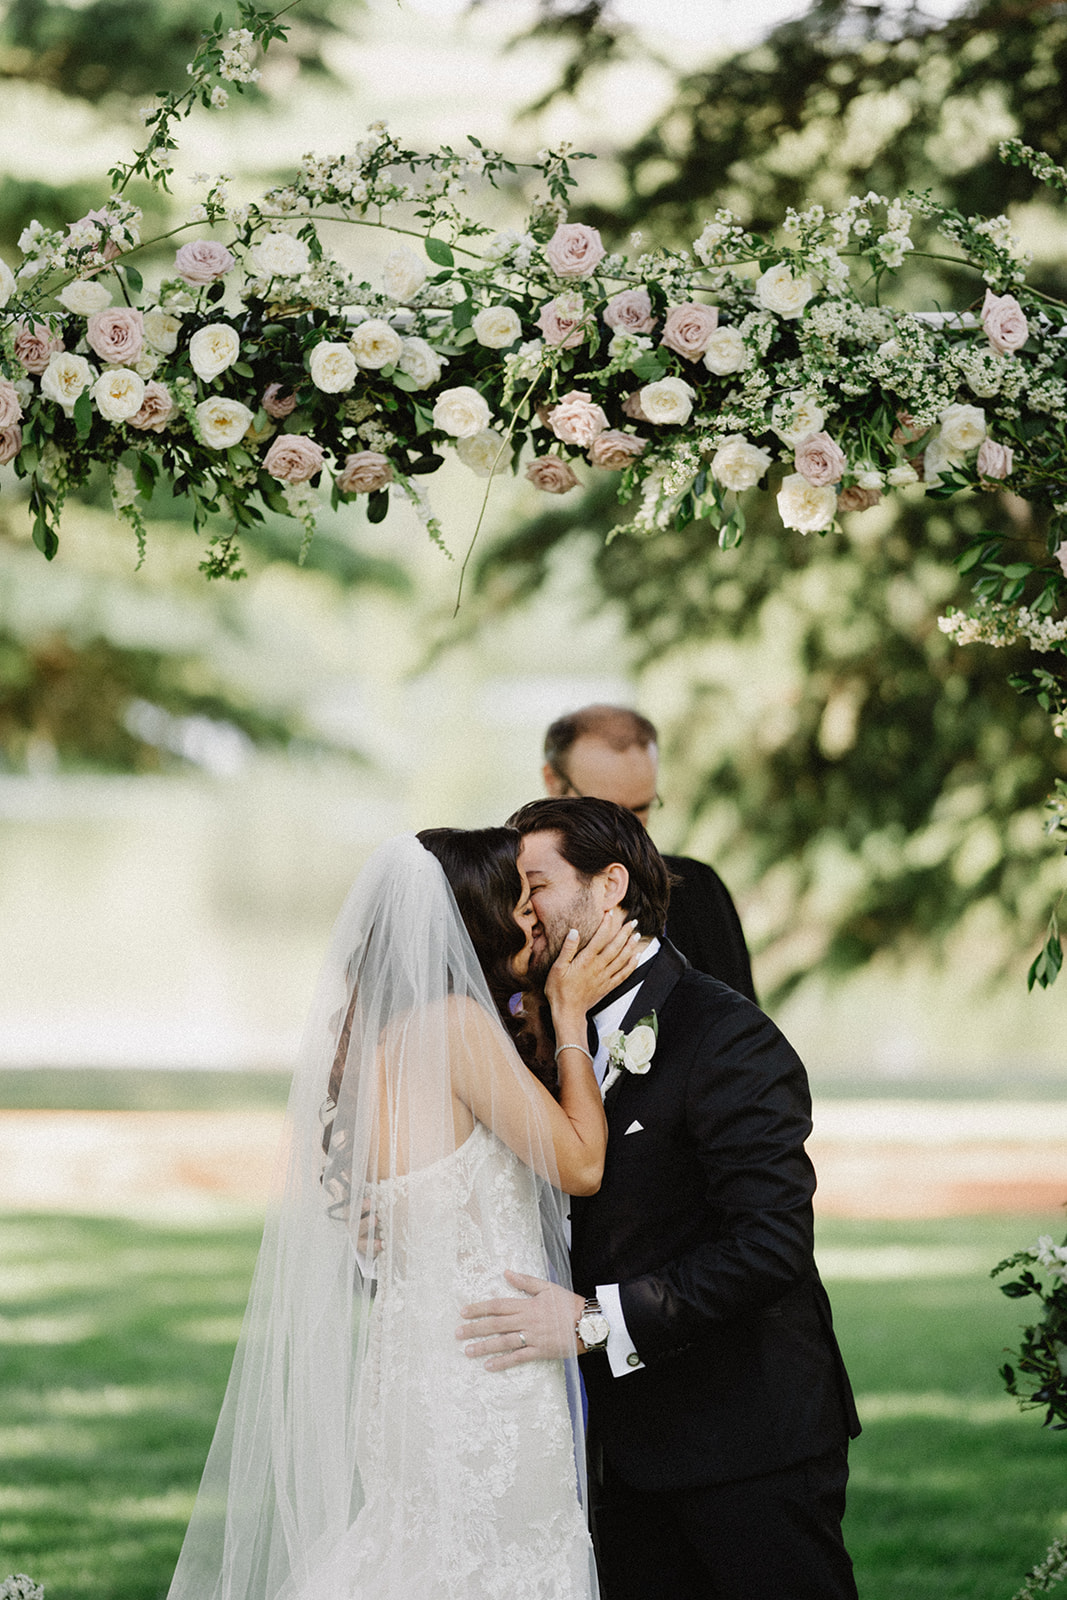 Jess and Christian's wedding day | kiss | Tumbleweed Events